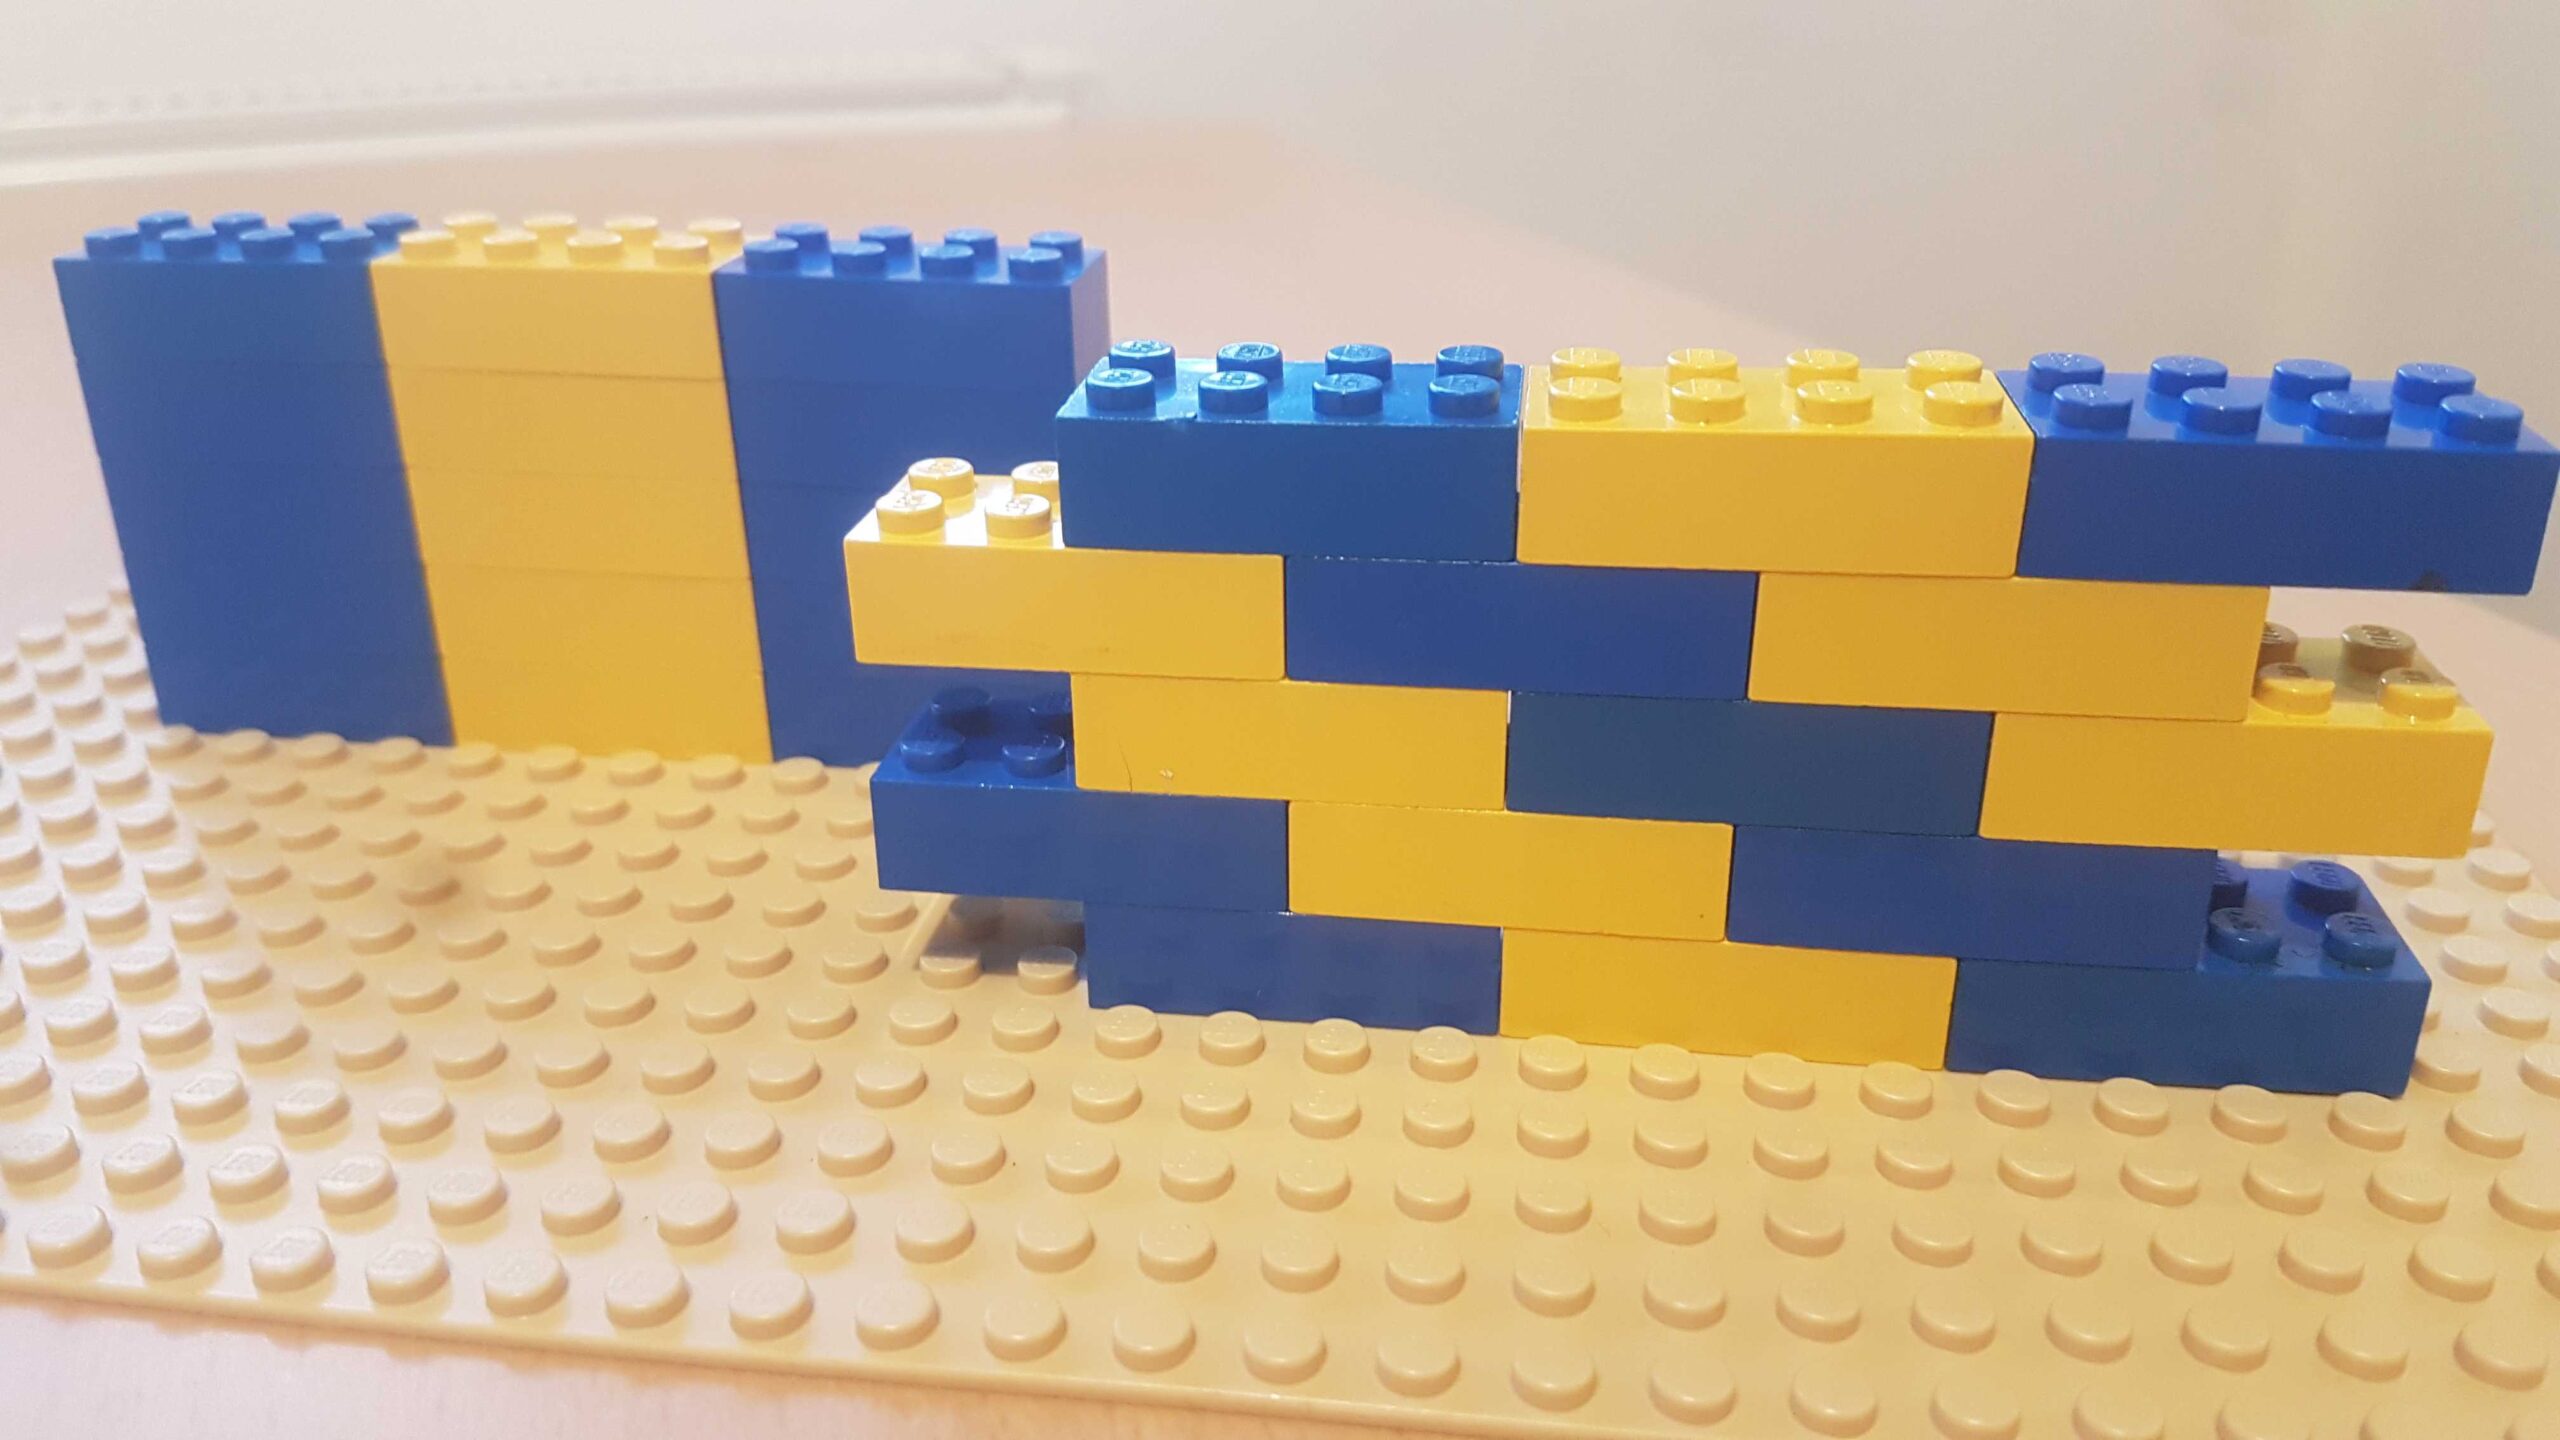 Blue and yellow Lego pieces built up in a stack in two different ways.